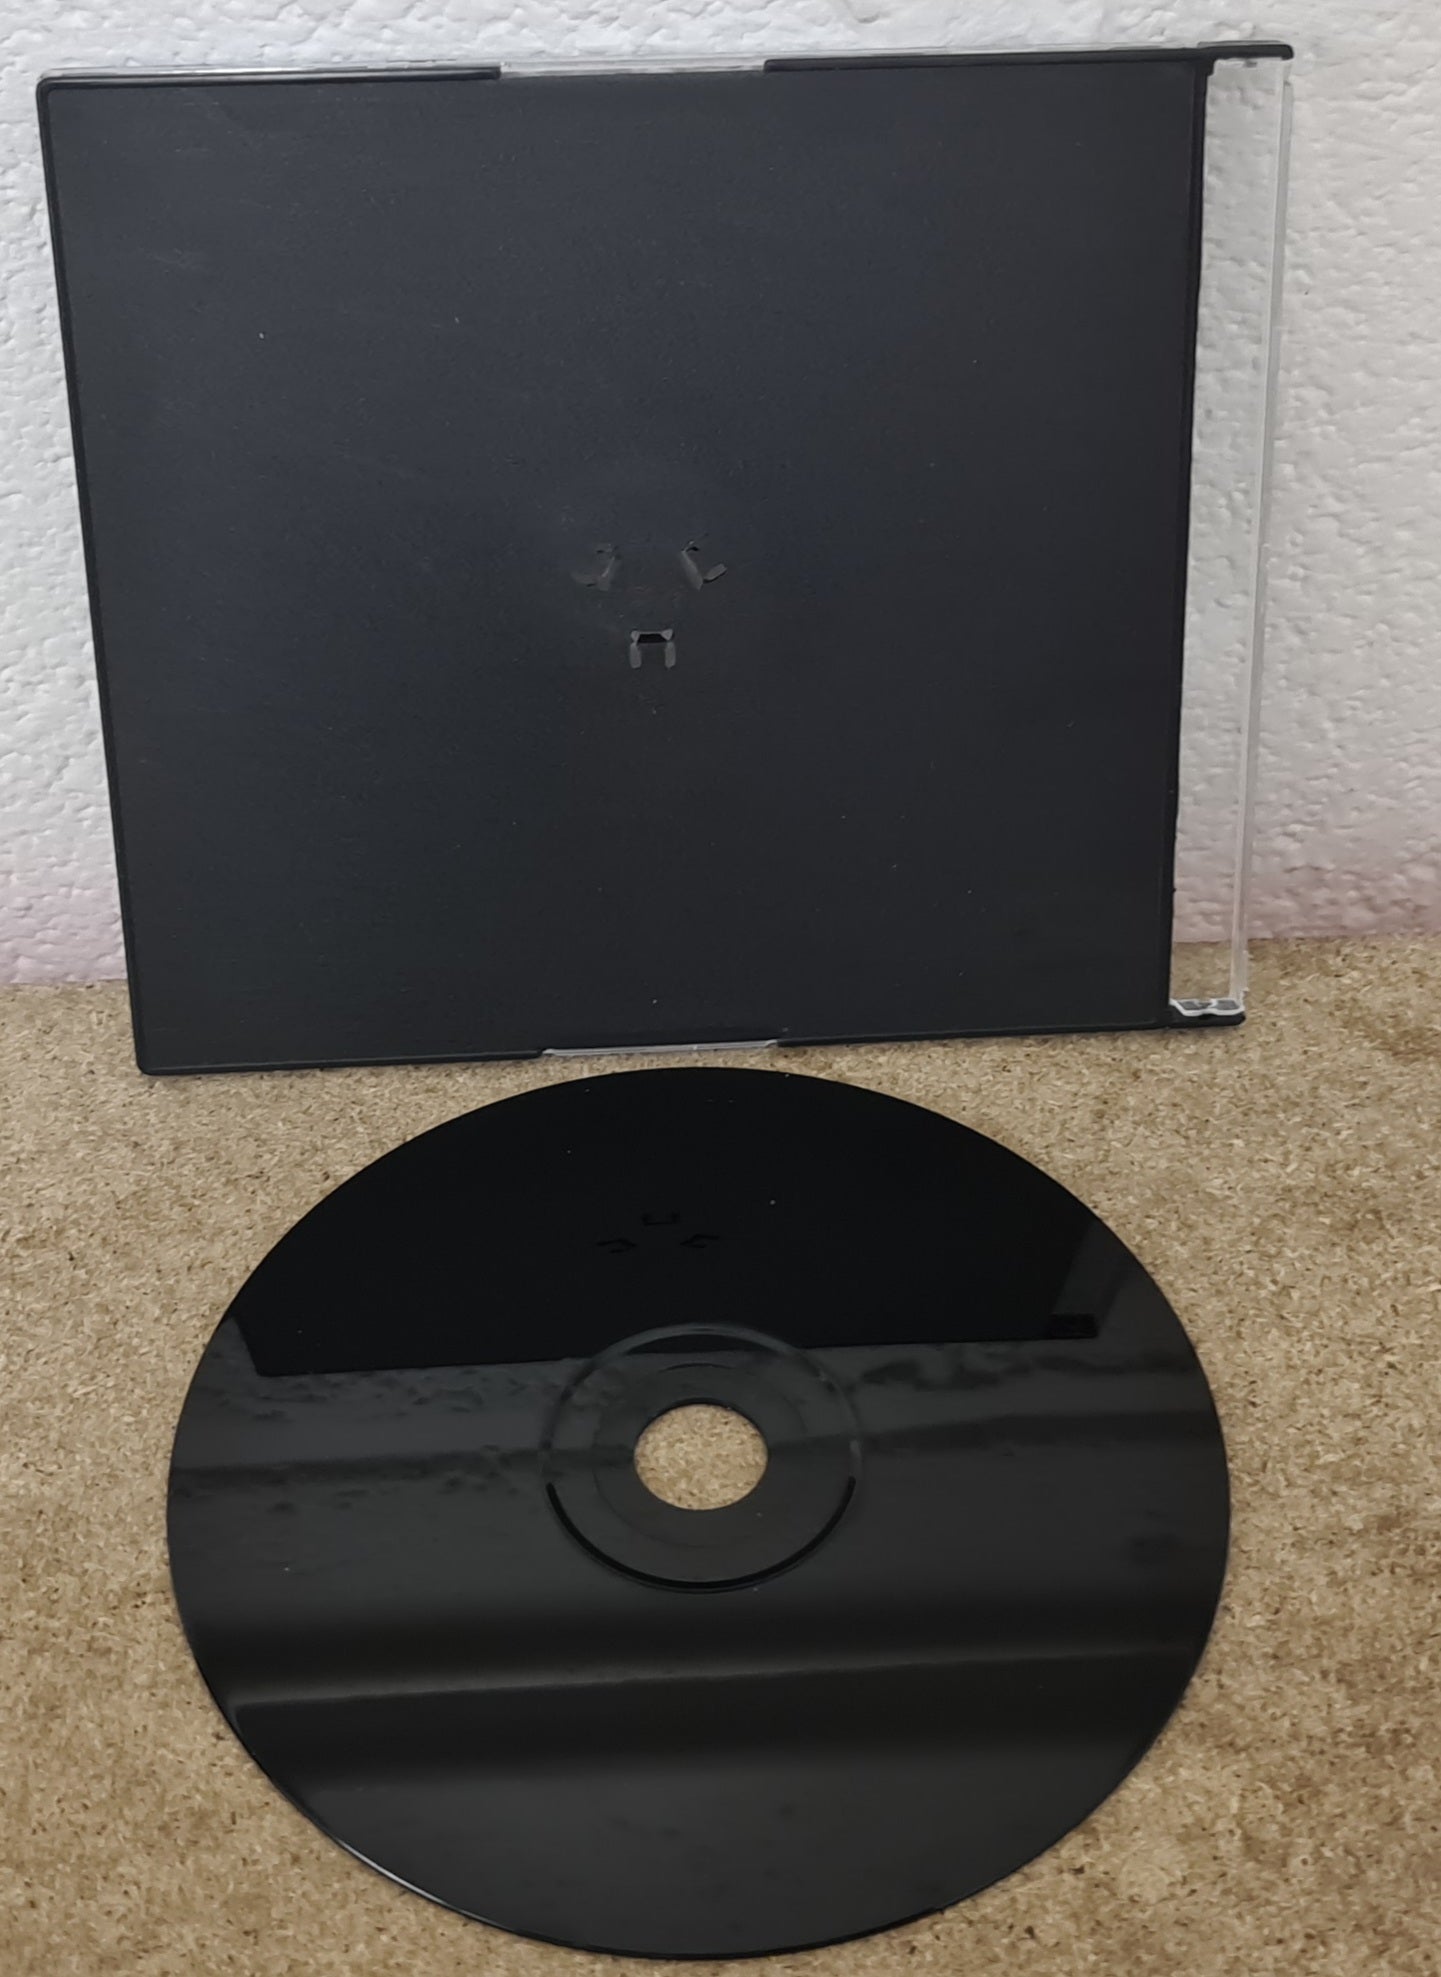 Gran Turismo Sony Playstation 1 (PS1) Game Disc Only